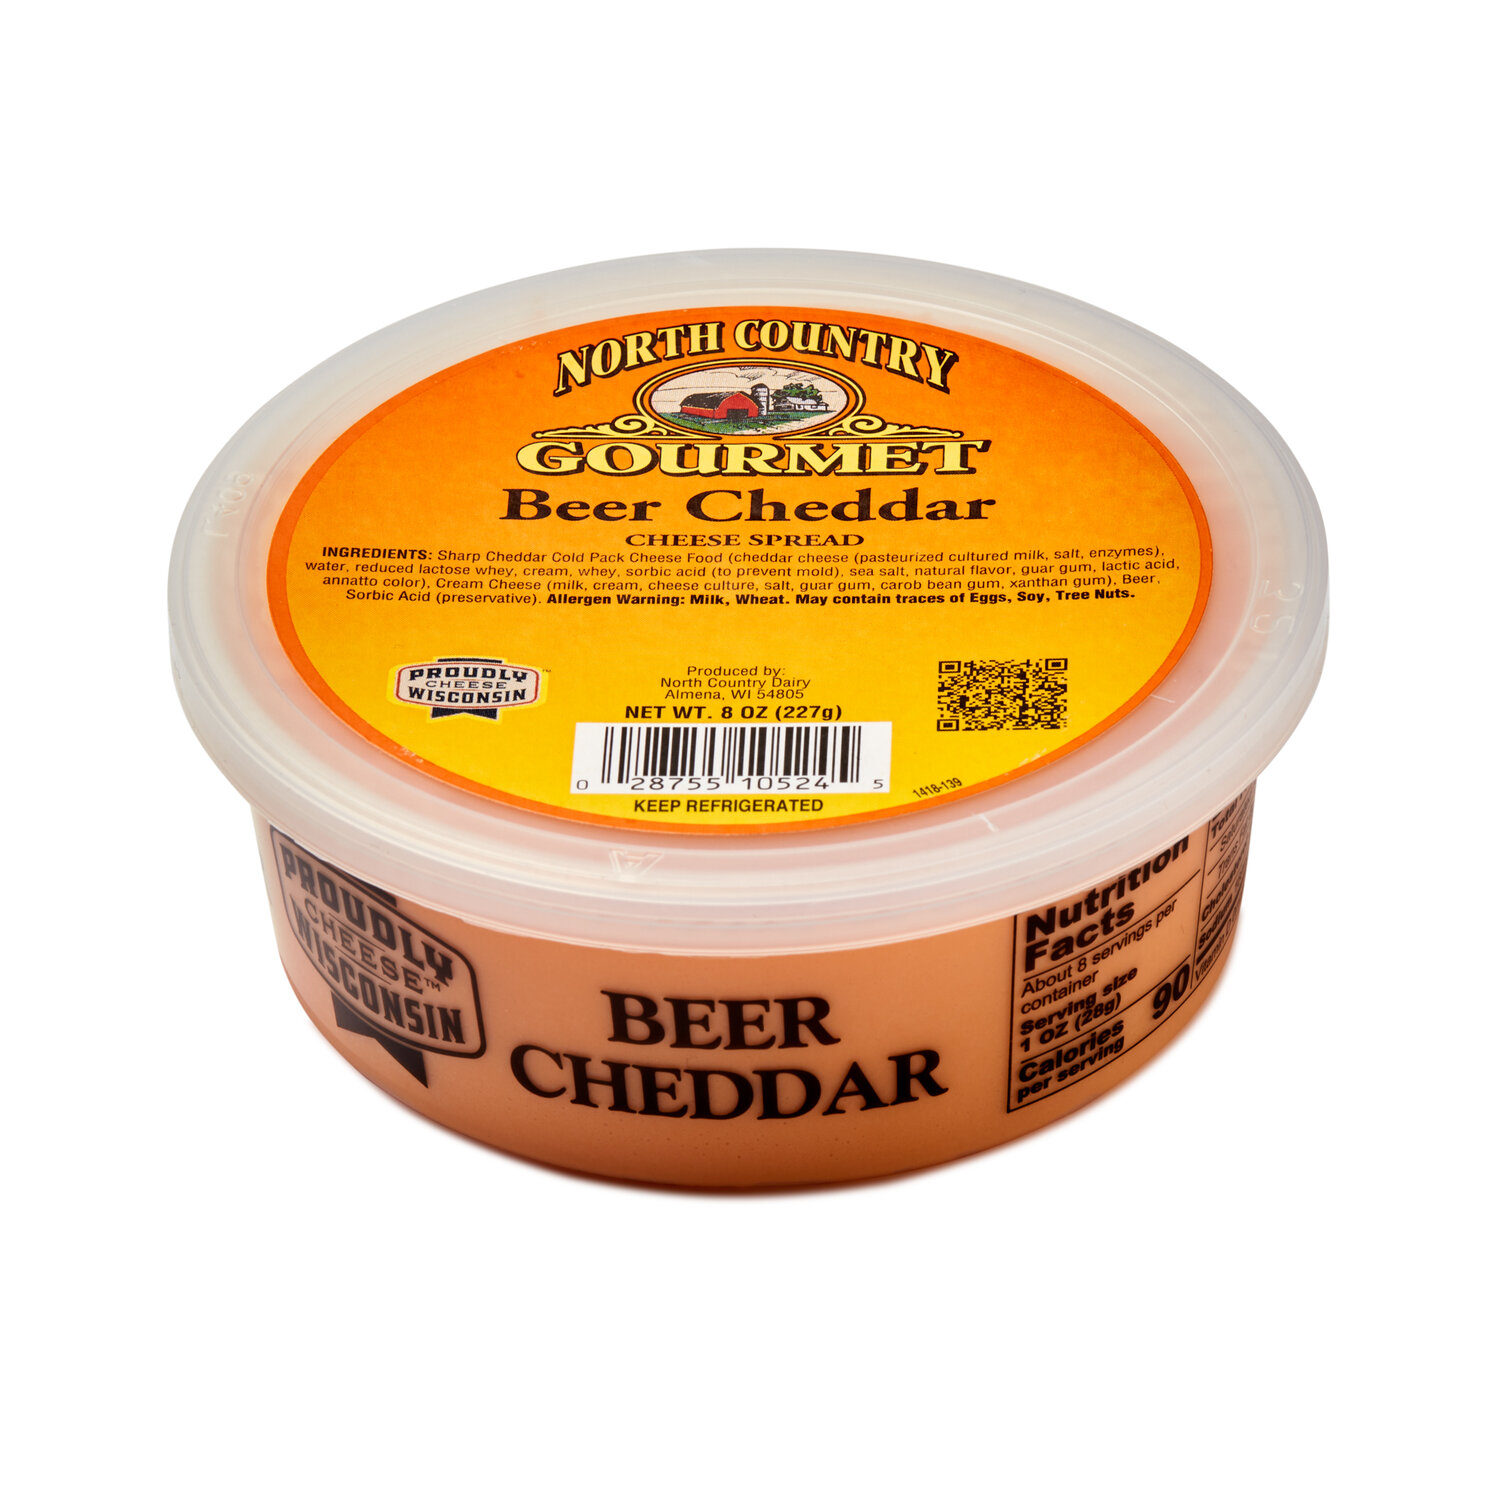 Beer Cheddar Cheese Spread 8oz. — North Country Cheese